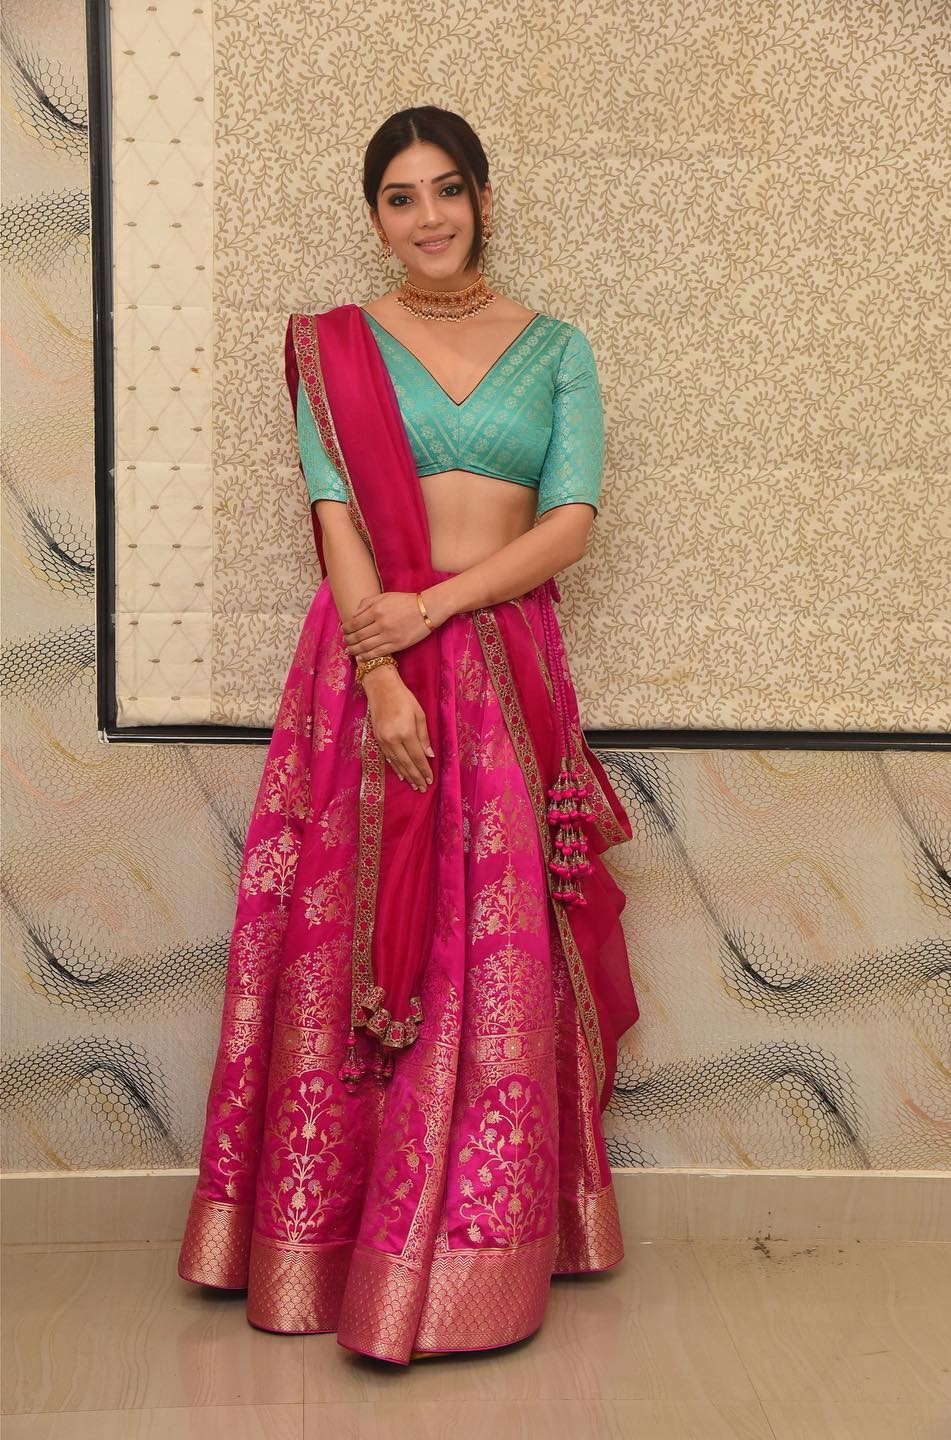 Mehreen Pirzada In Traditional Pink & Blue Silk Lehenga Looks Festive Awestruck Looks & Glamorous Outfits